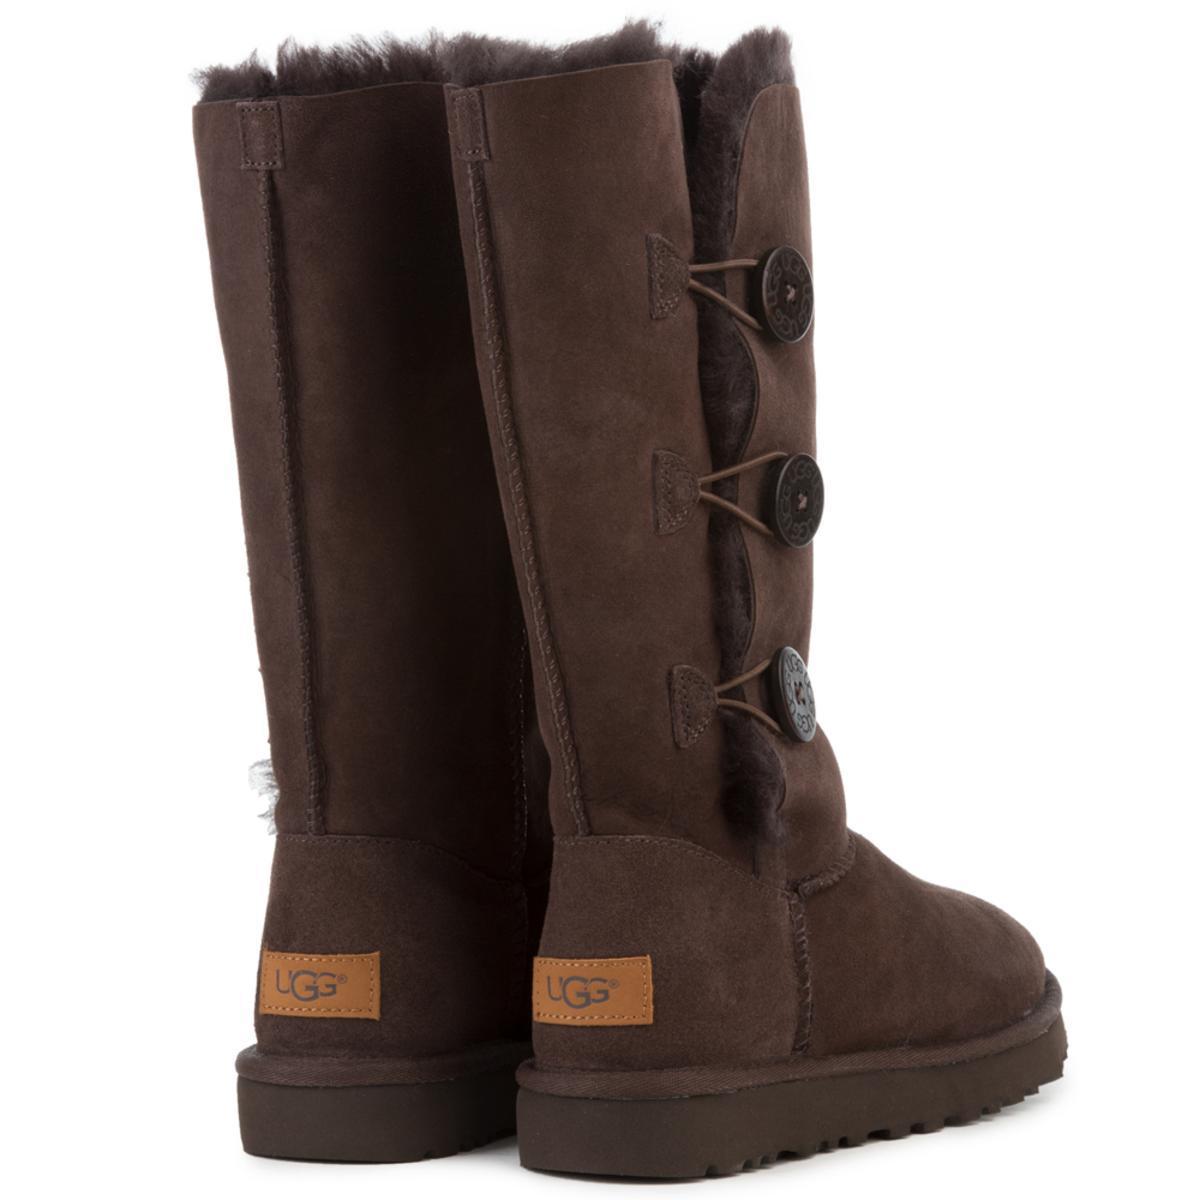 UGG Synthetic Bailey Button Triplet Ii Chocolate Boots in Brown - Lyst